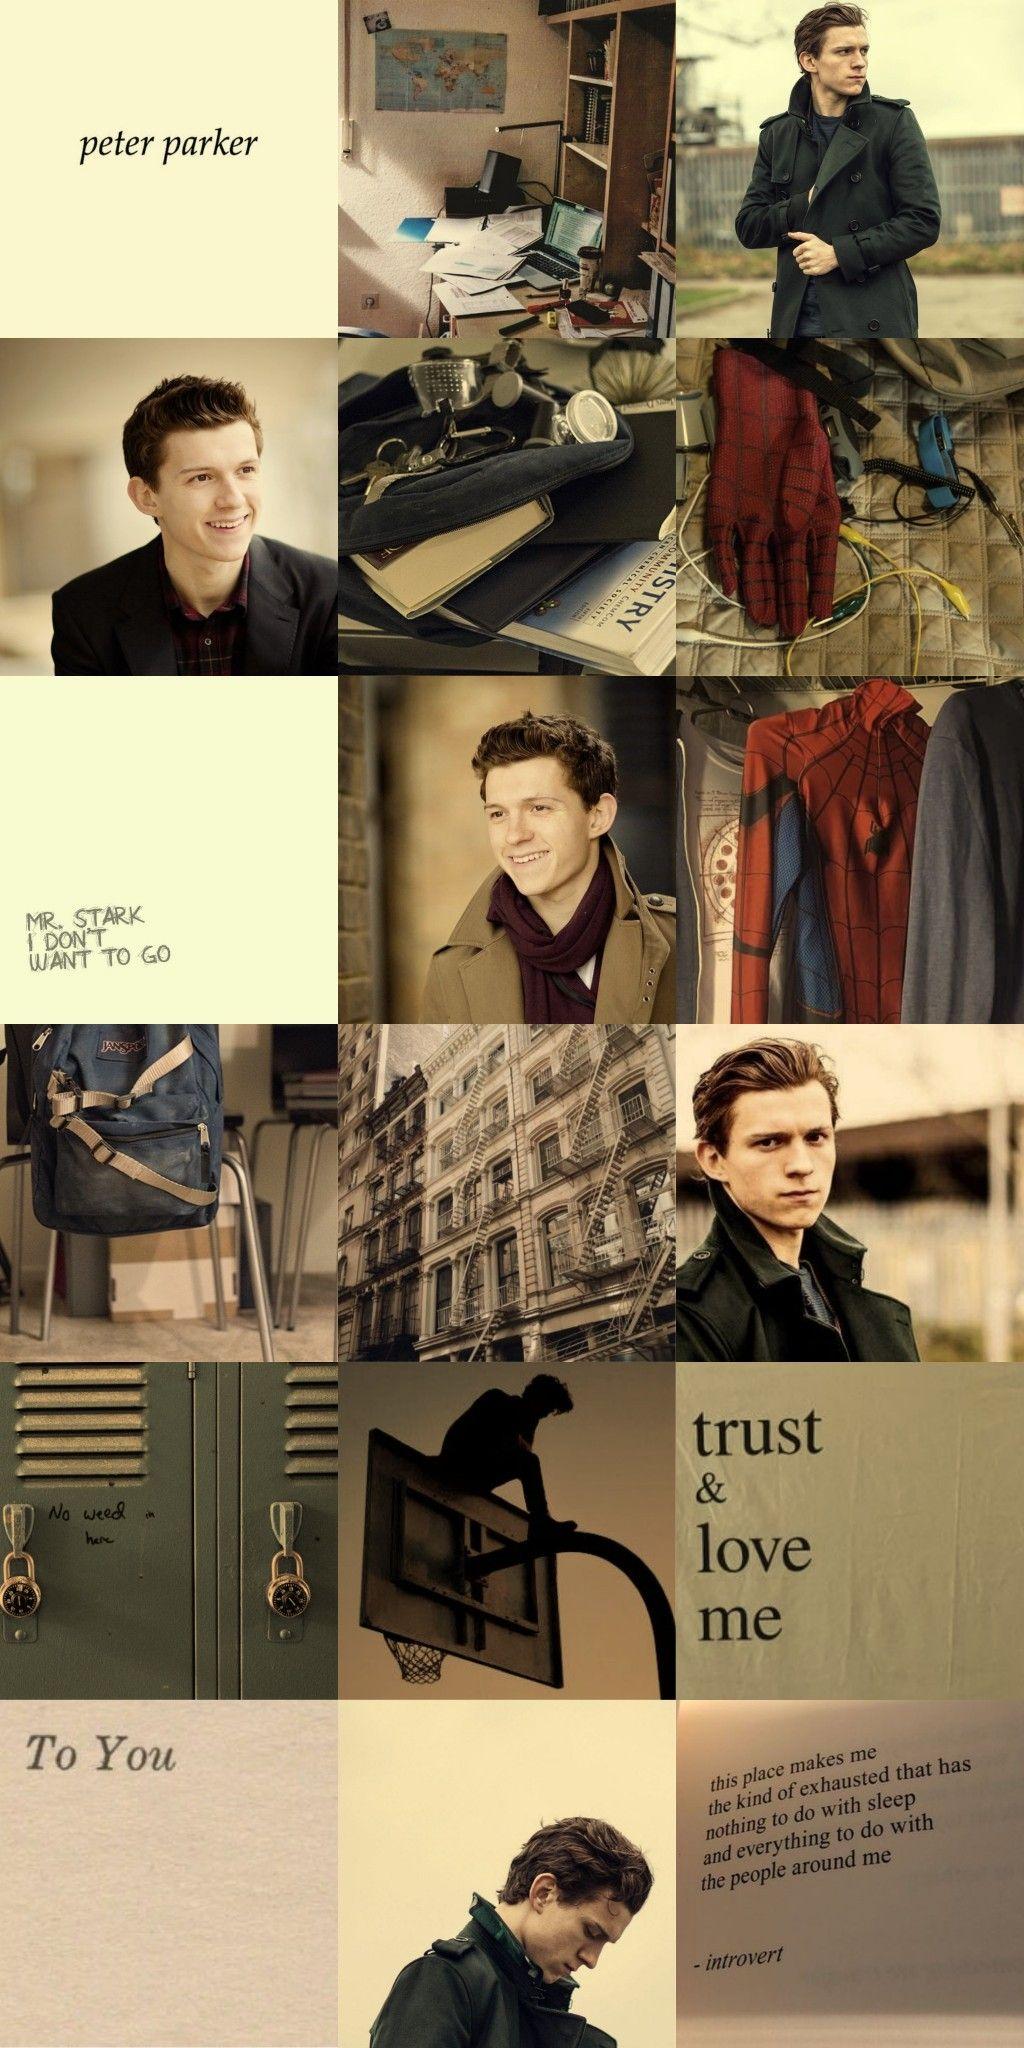 Tom Holland as Peter Parker in Spider-Man: Homecoming. A collage of images of Tom as Peter Parker, a scene from the movie, and a quote from the movie. - Tom Holland